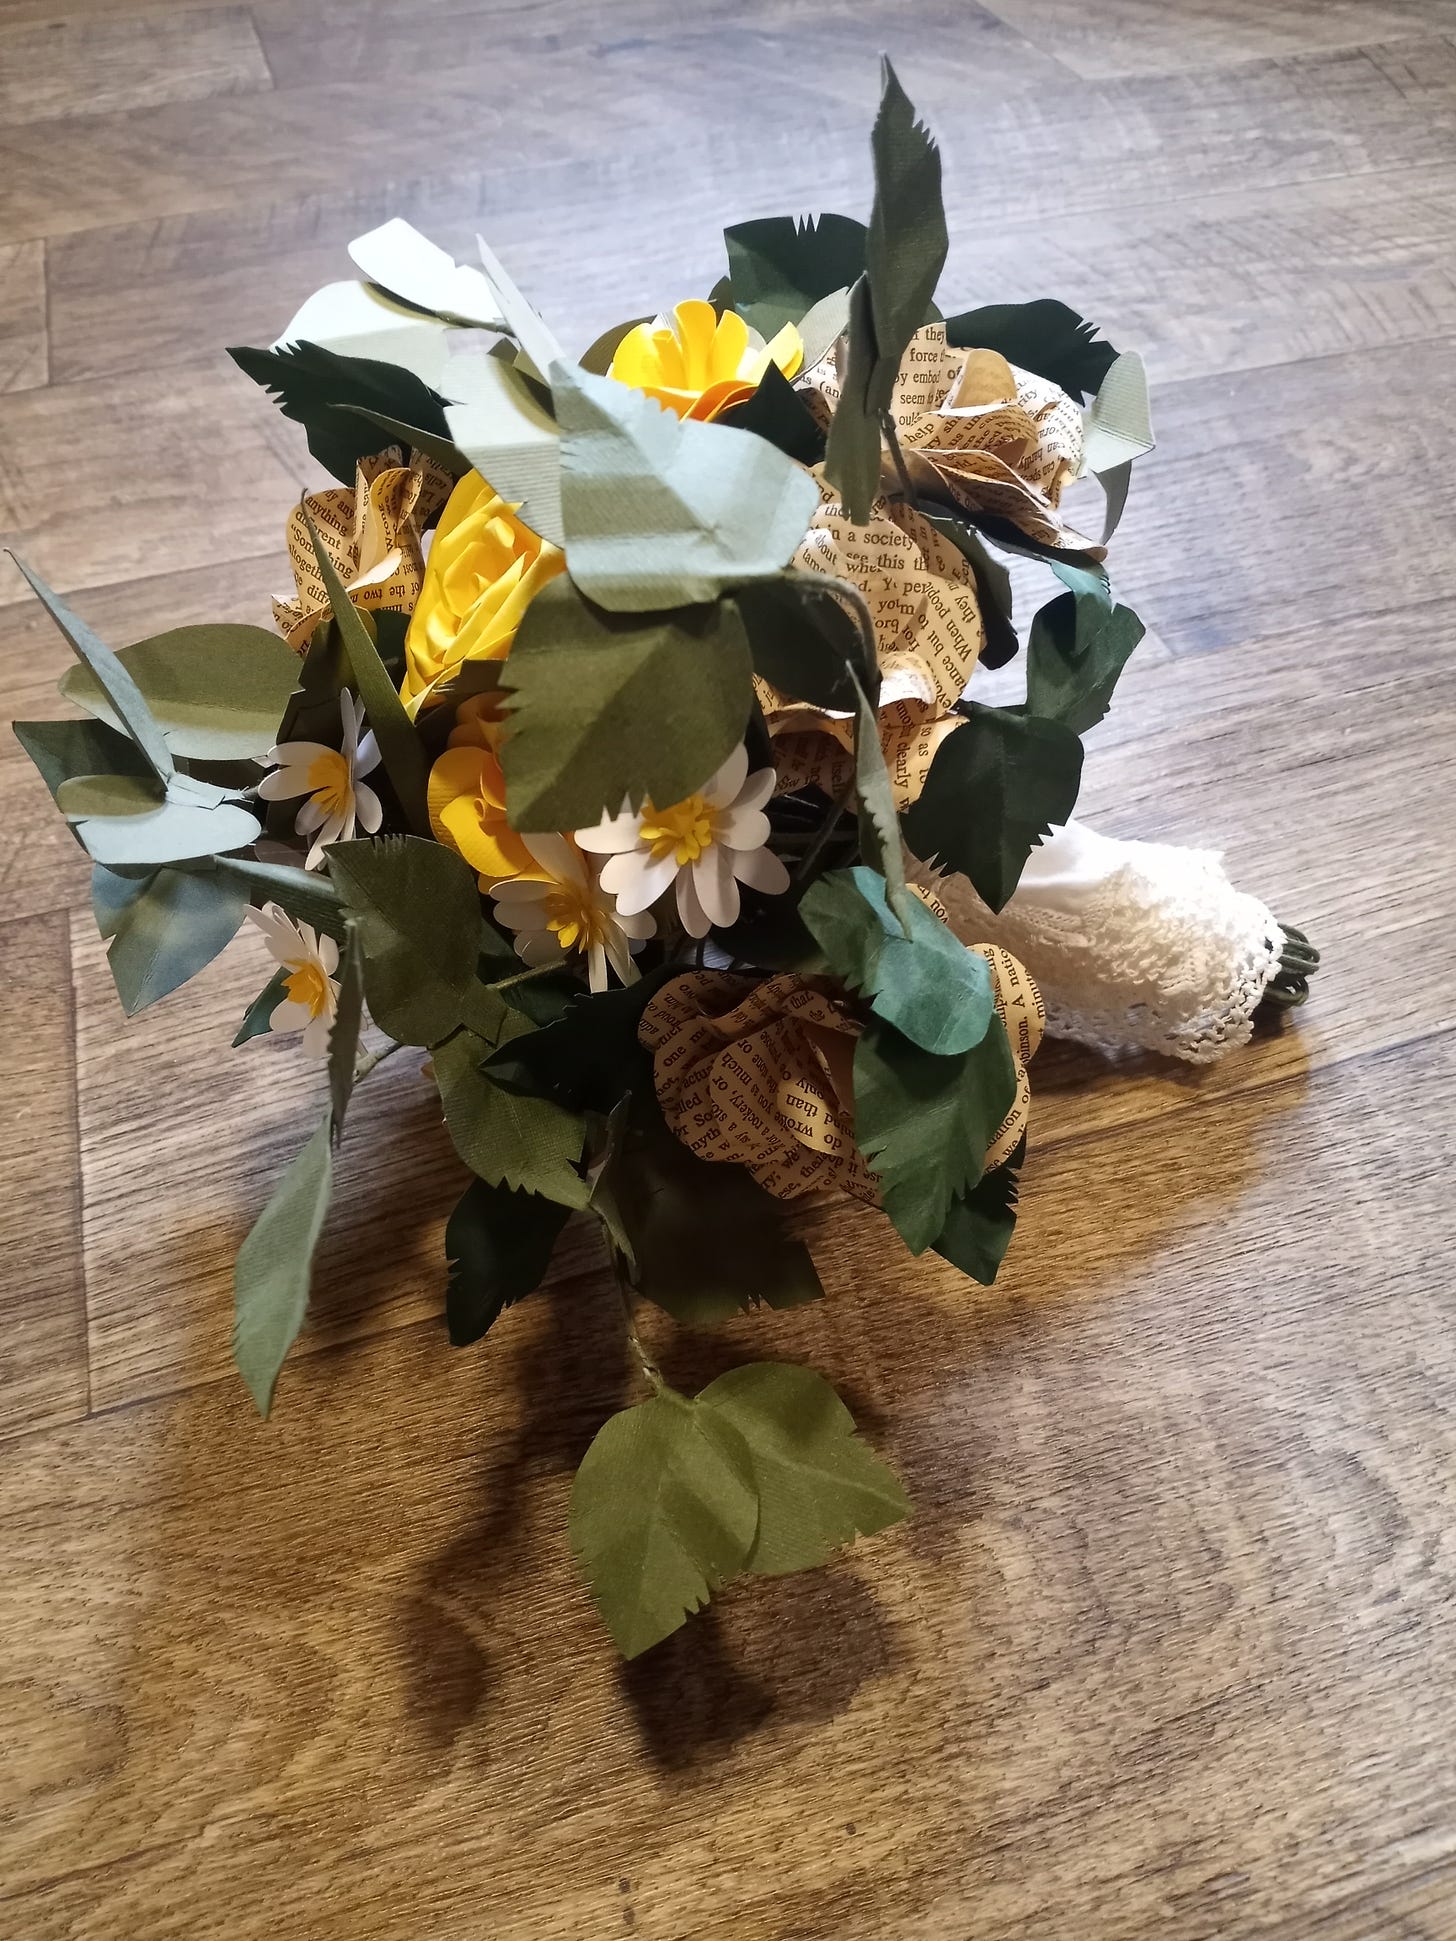 A bouquet of paper flowers, made of book paper and yellow paper made to look like roses, complete with green paper made to look like leaves